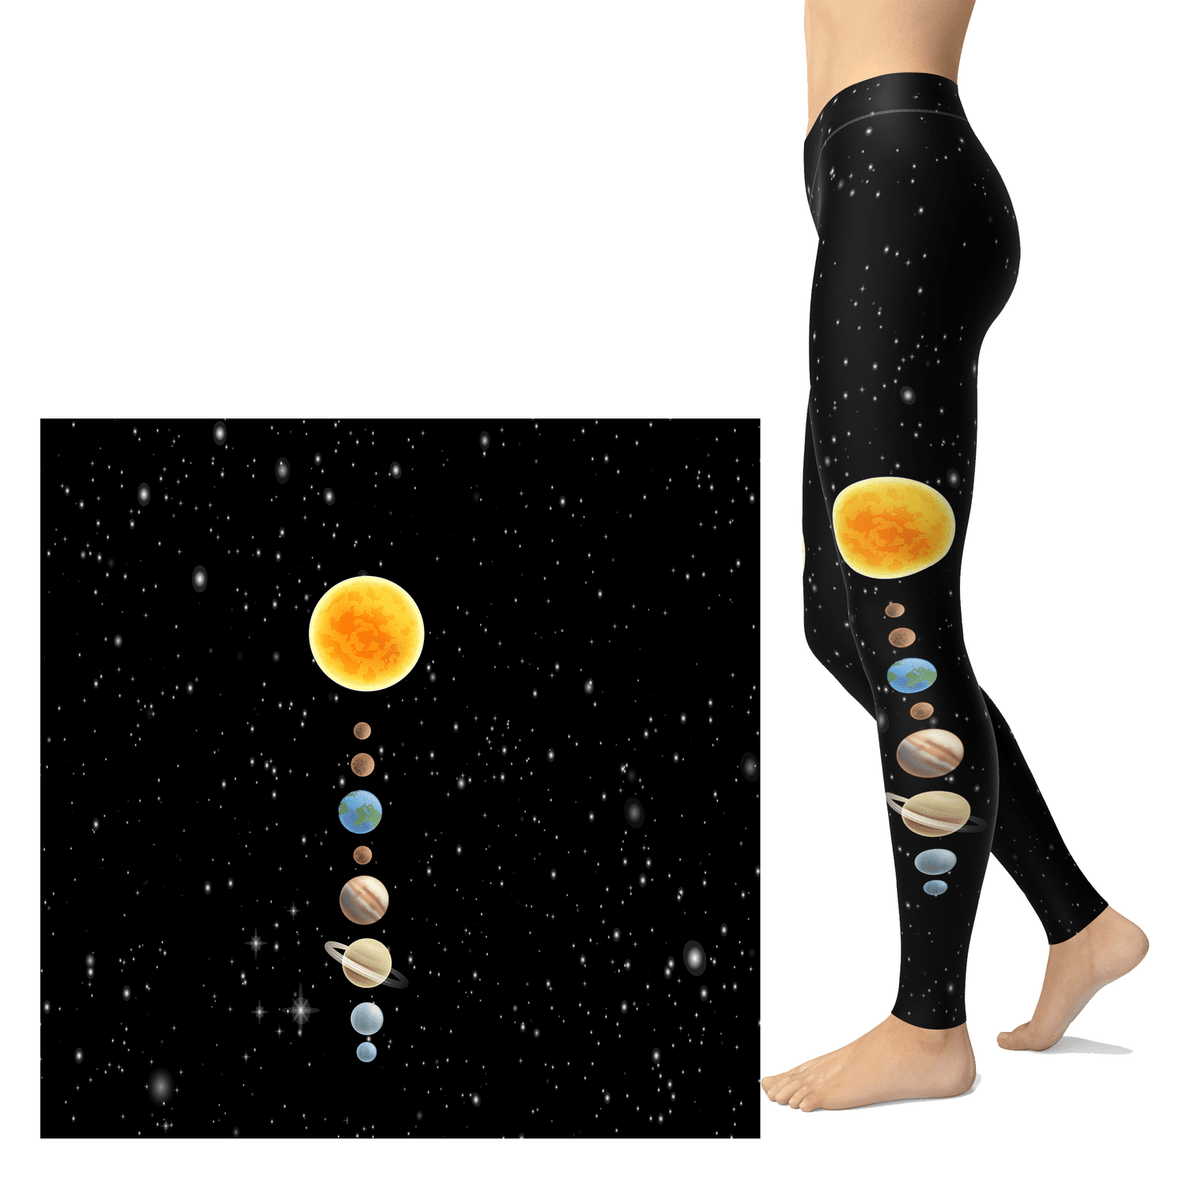 Planets Leggings and Sol in our Solar System Space Black Background Pocket